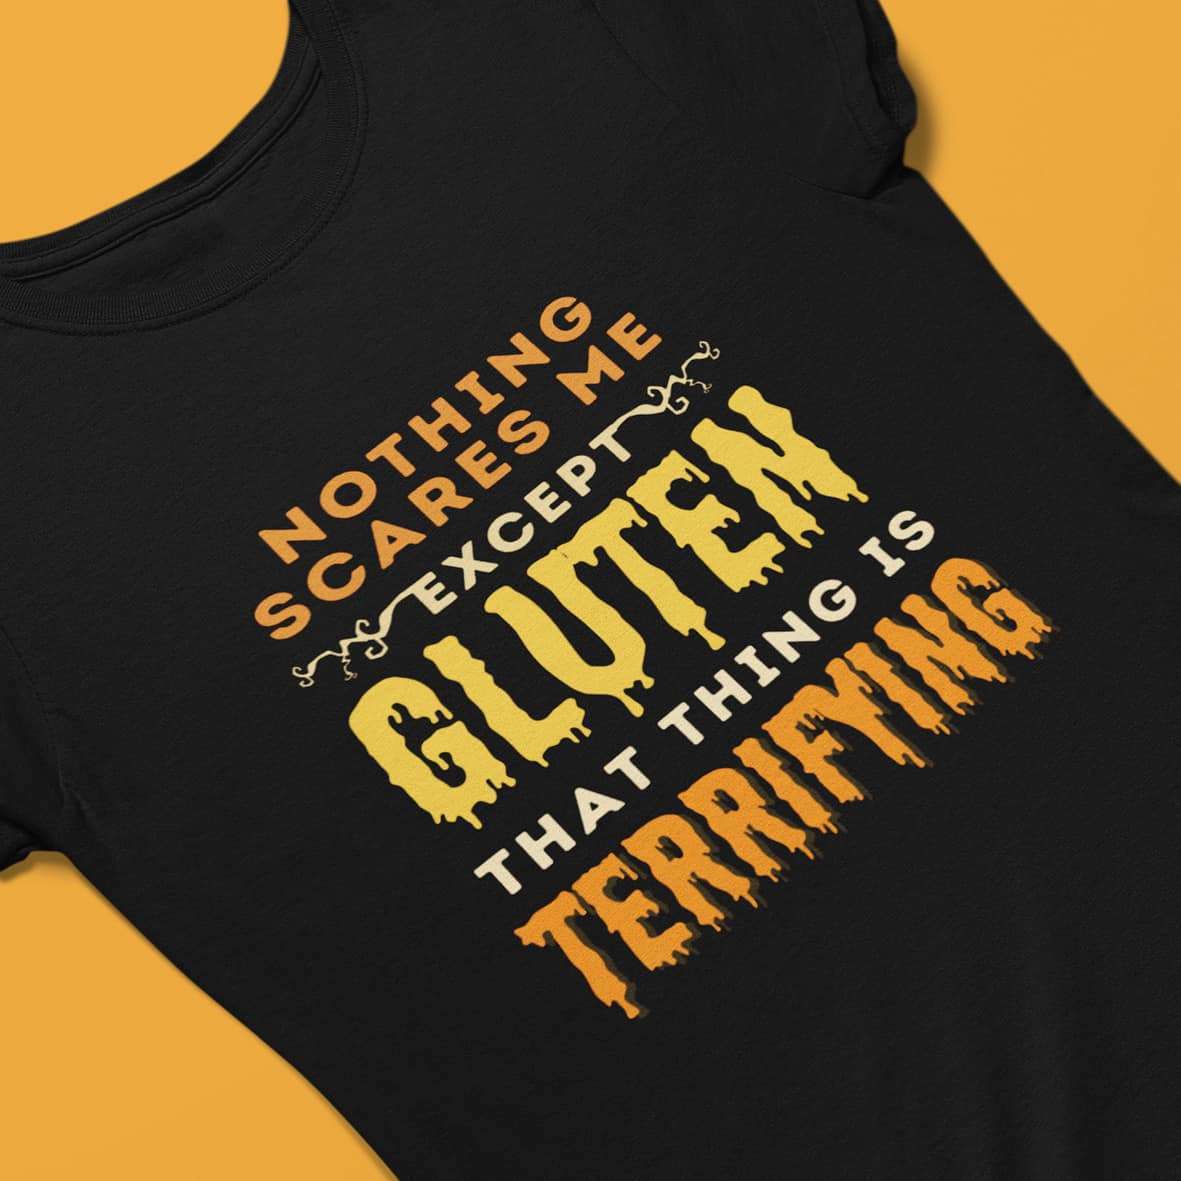 Nothing scares me except gluten that thing is terrifying